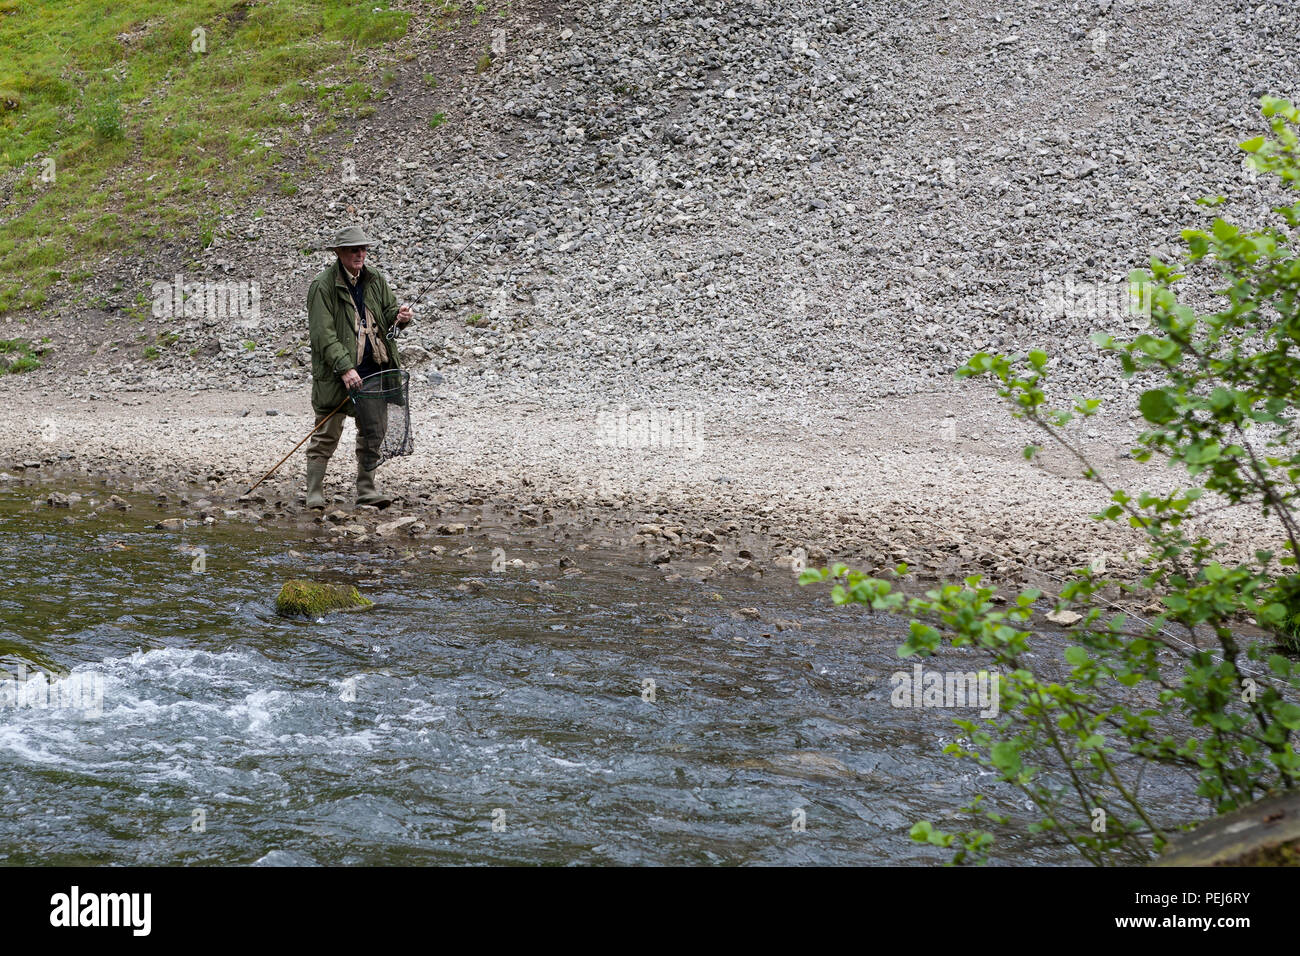 Fly-fishing on the River Dove near Thorpe Cloud, Dovedale, Derbyshire Stock Photo